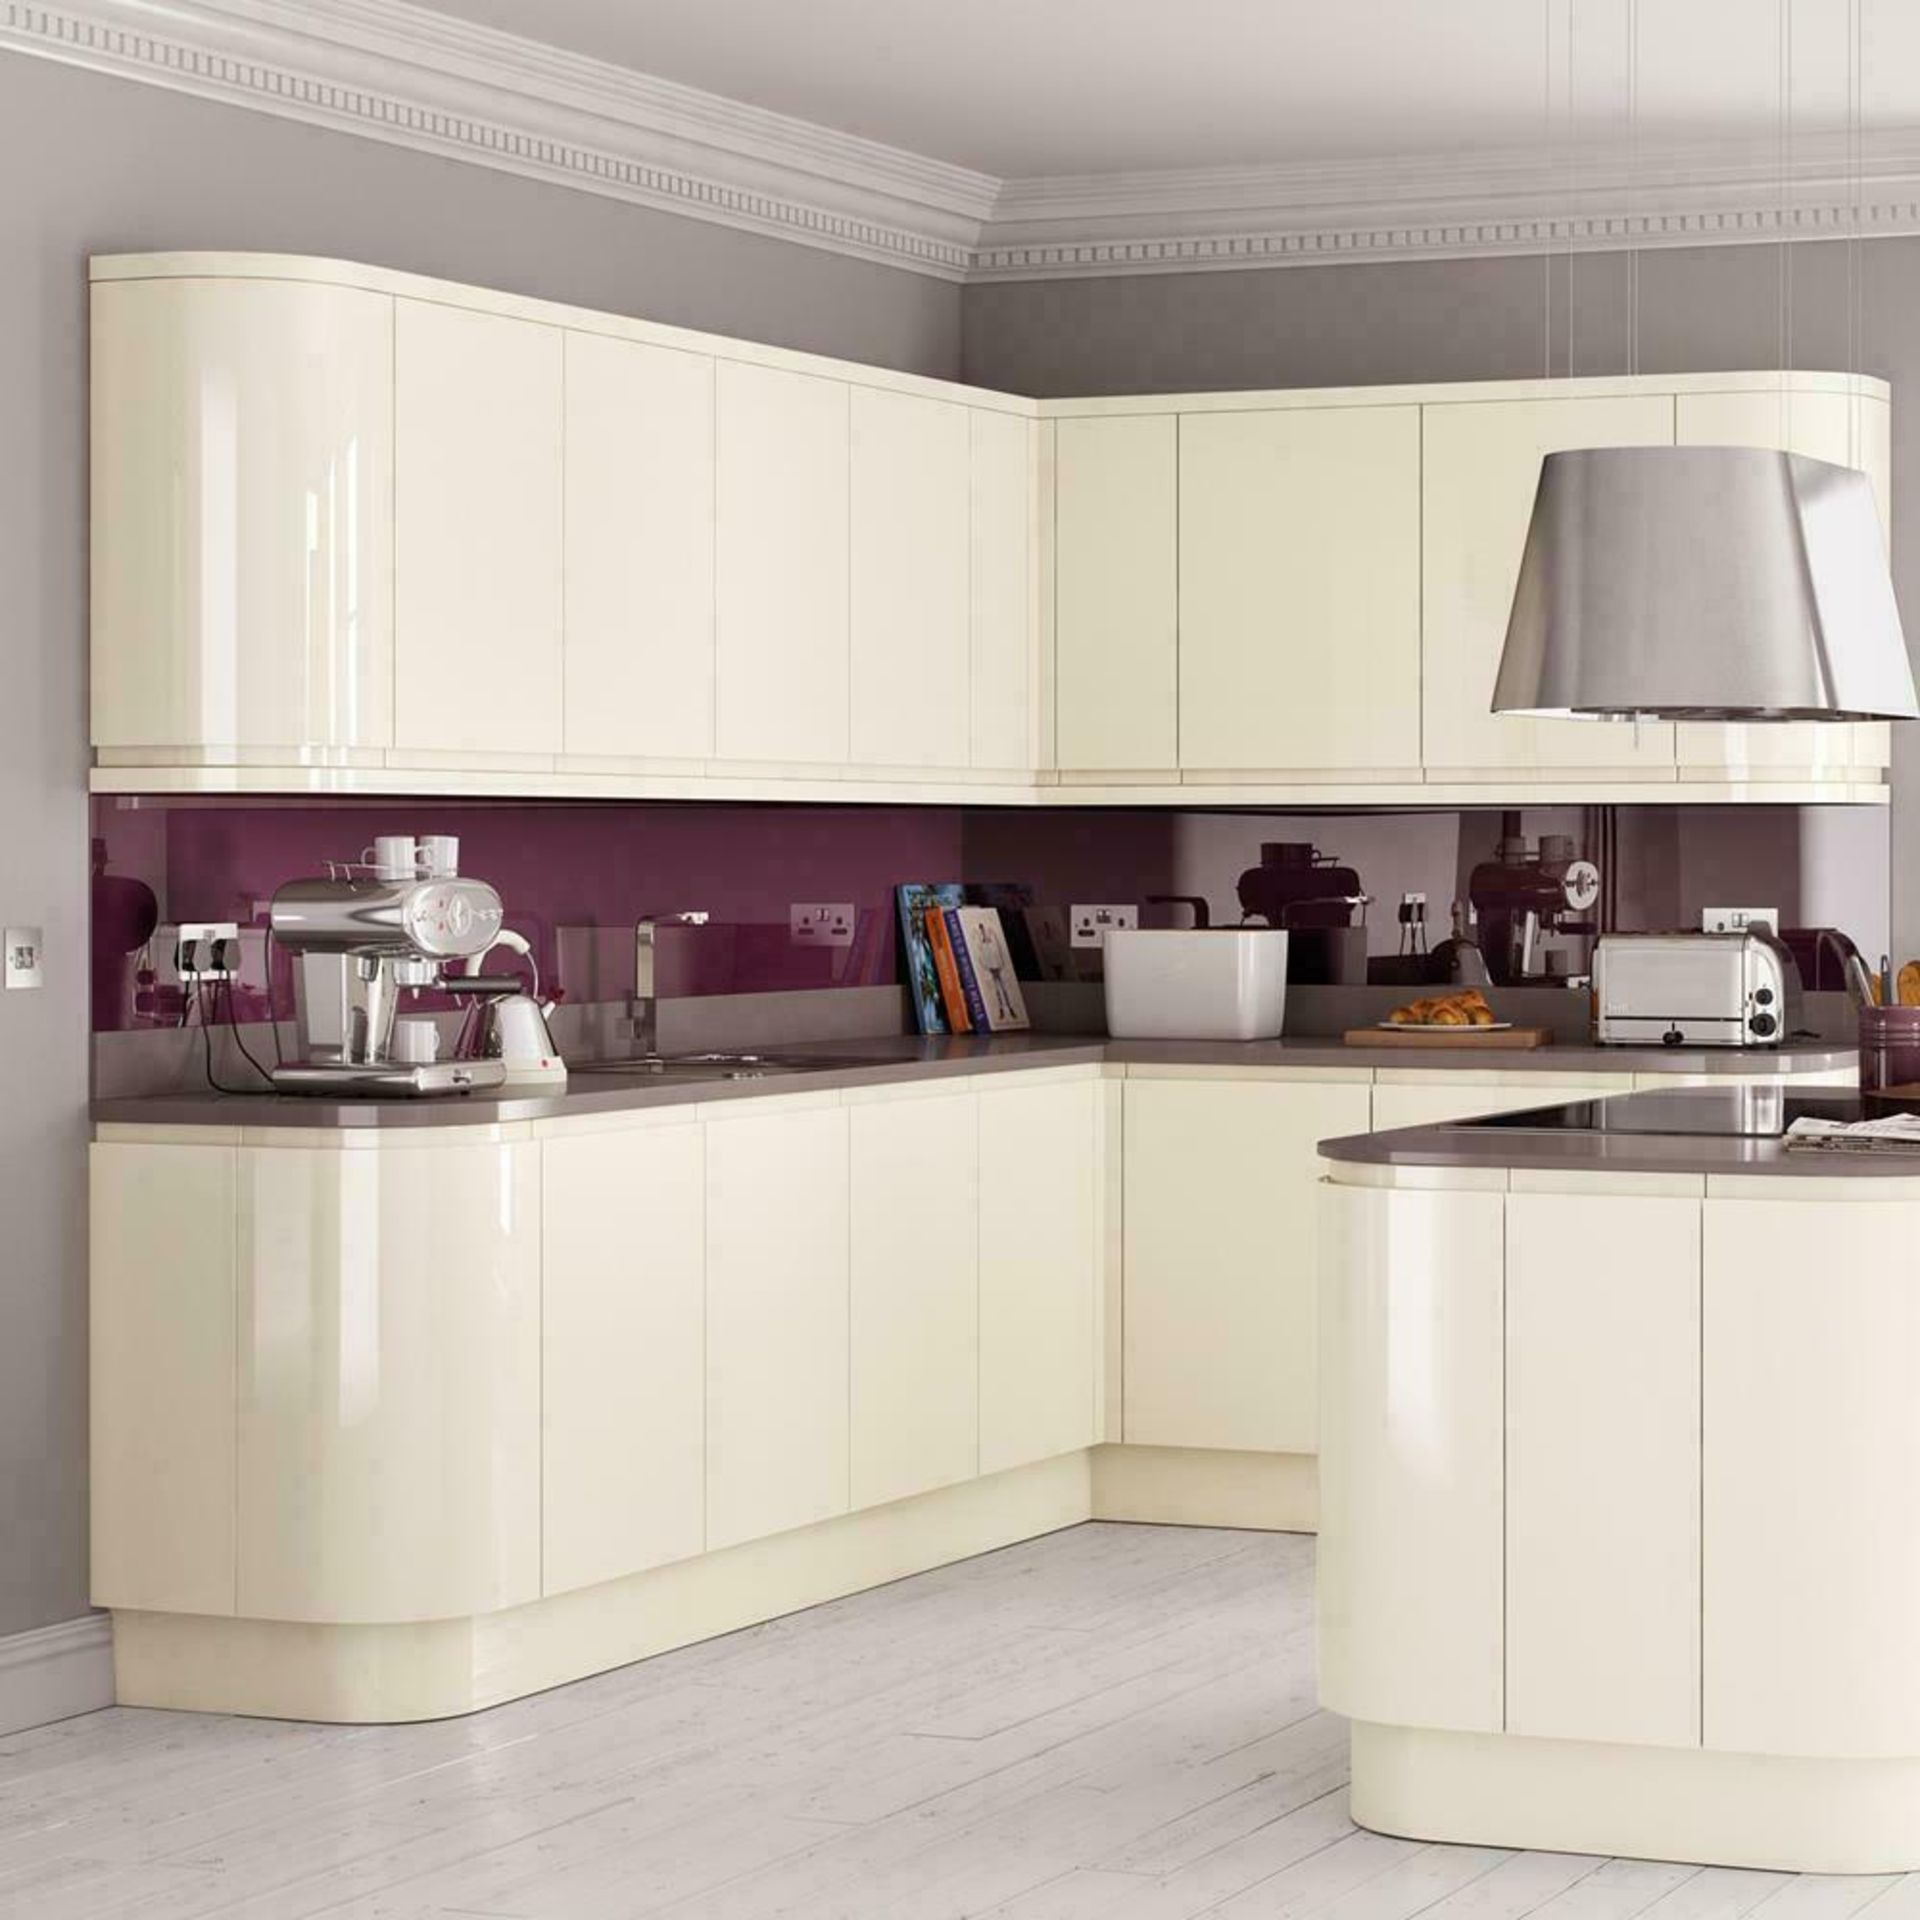 Circa 4,295 items of Kitchen Goods from the following ranges: Gloss White, Gloss Cream, Sandford